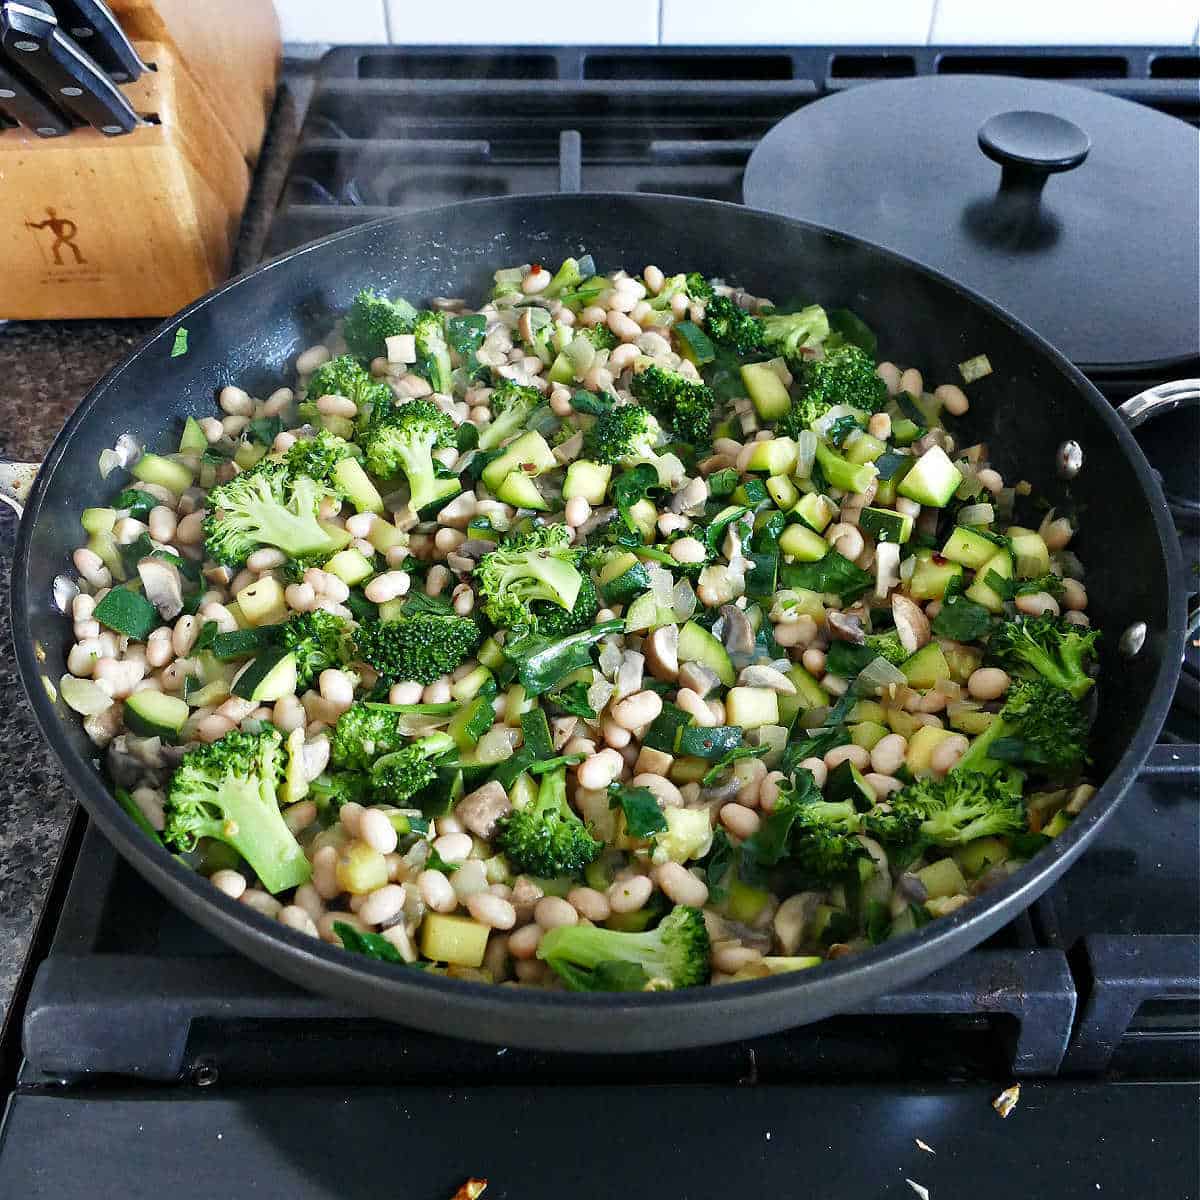 vegetables for lasagna cooking in a large skillet over a stove